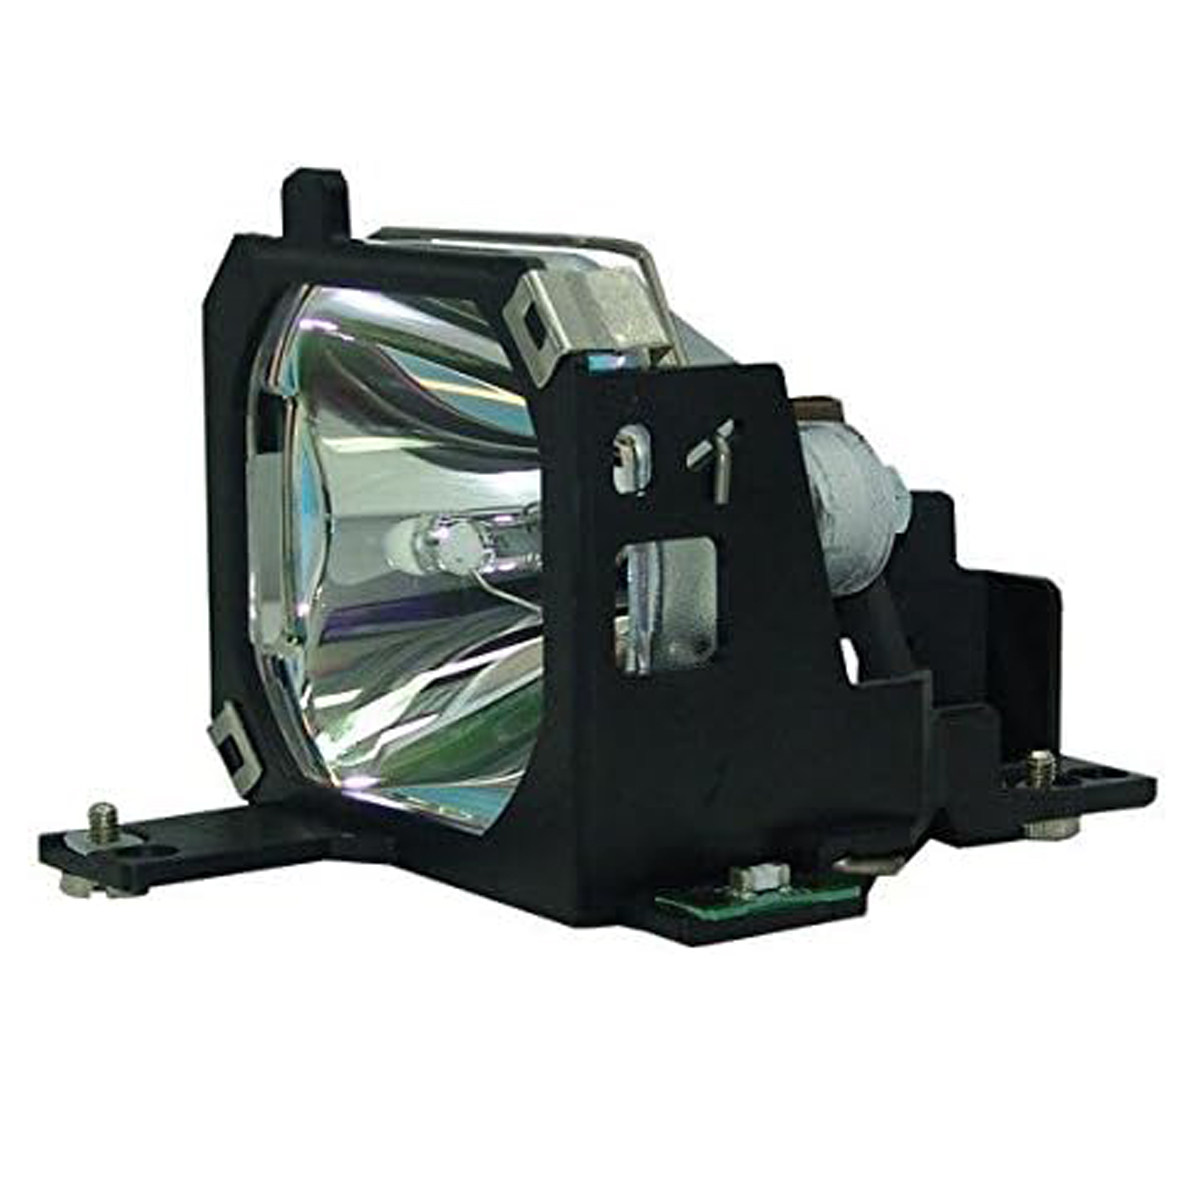 Replacement Projector lamp ELPLP09 For Epson EMP-5350 EMP-7250 EMP-7350